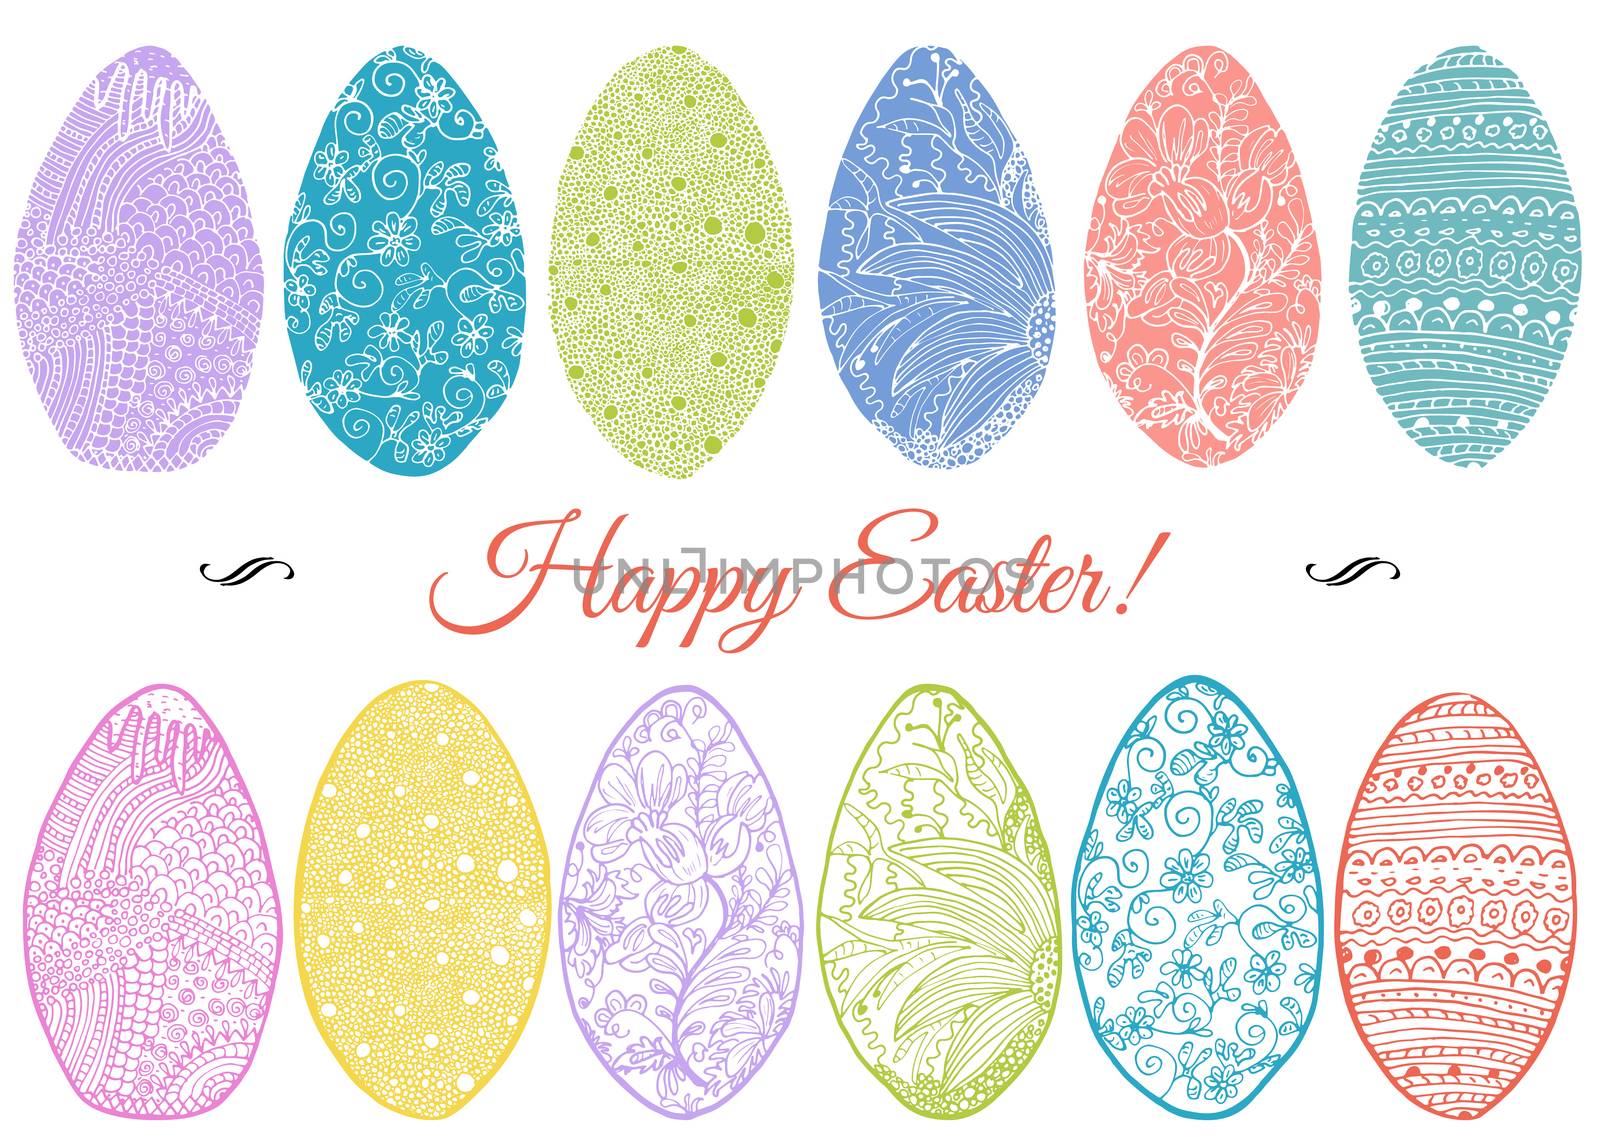 Ornamental hand drawn sketch of easter eggs in zentangle style. vector illustration with ornament and lettering happy easter, isolated.